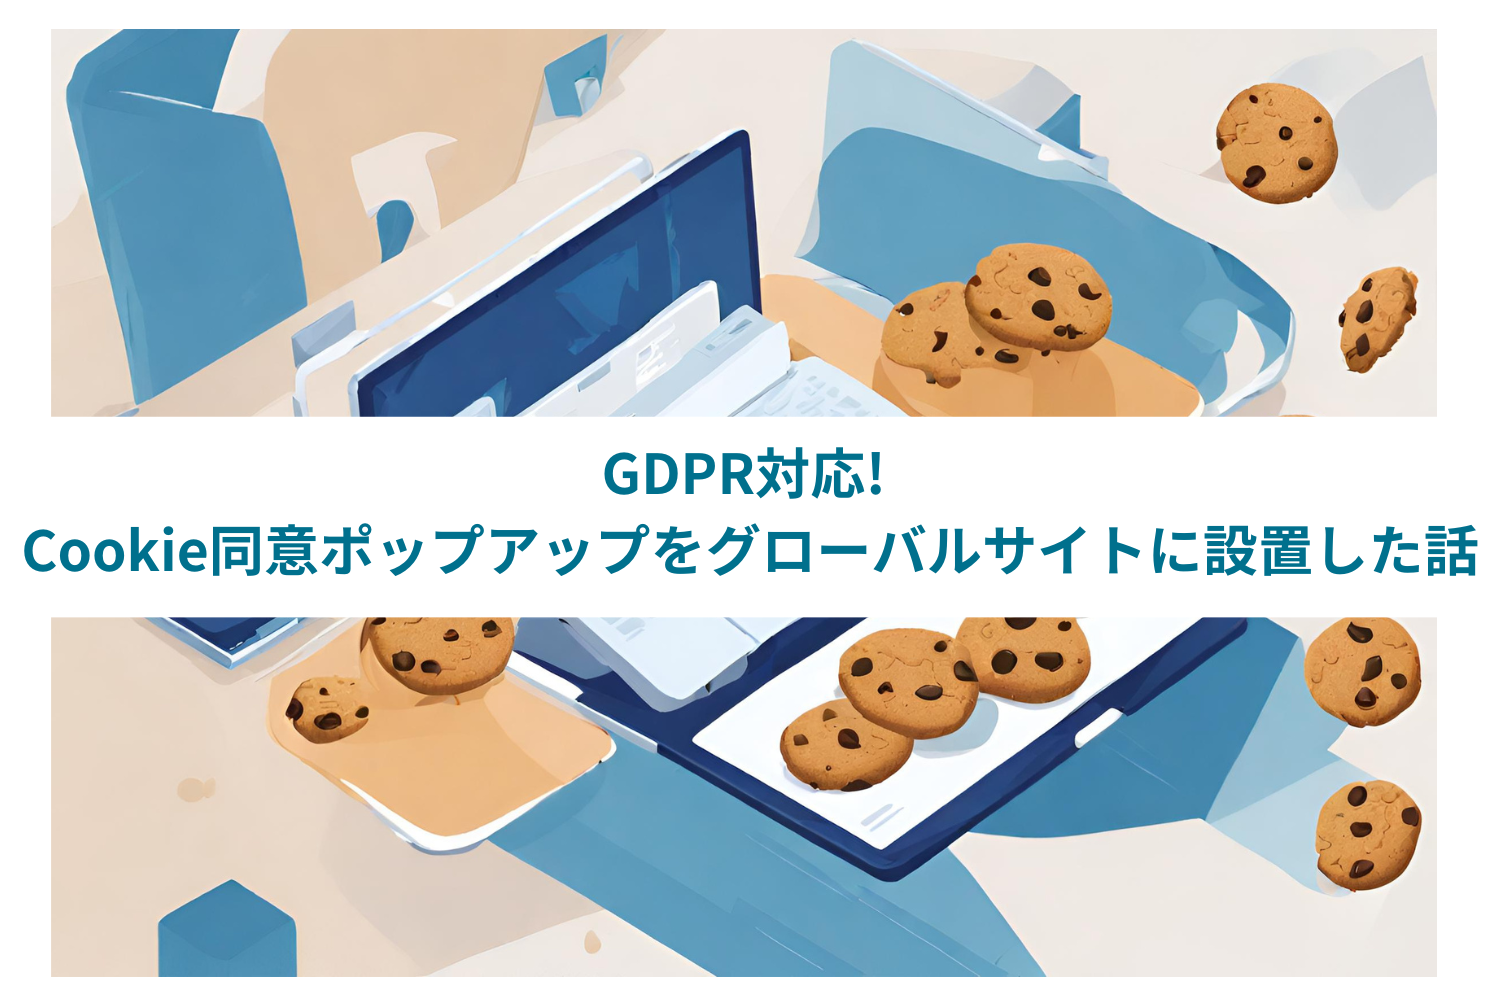 Cover Image for GDPR compliance: Implementing a Cookie Consent Pop-up on a Global Website